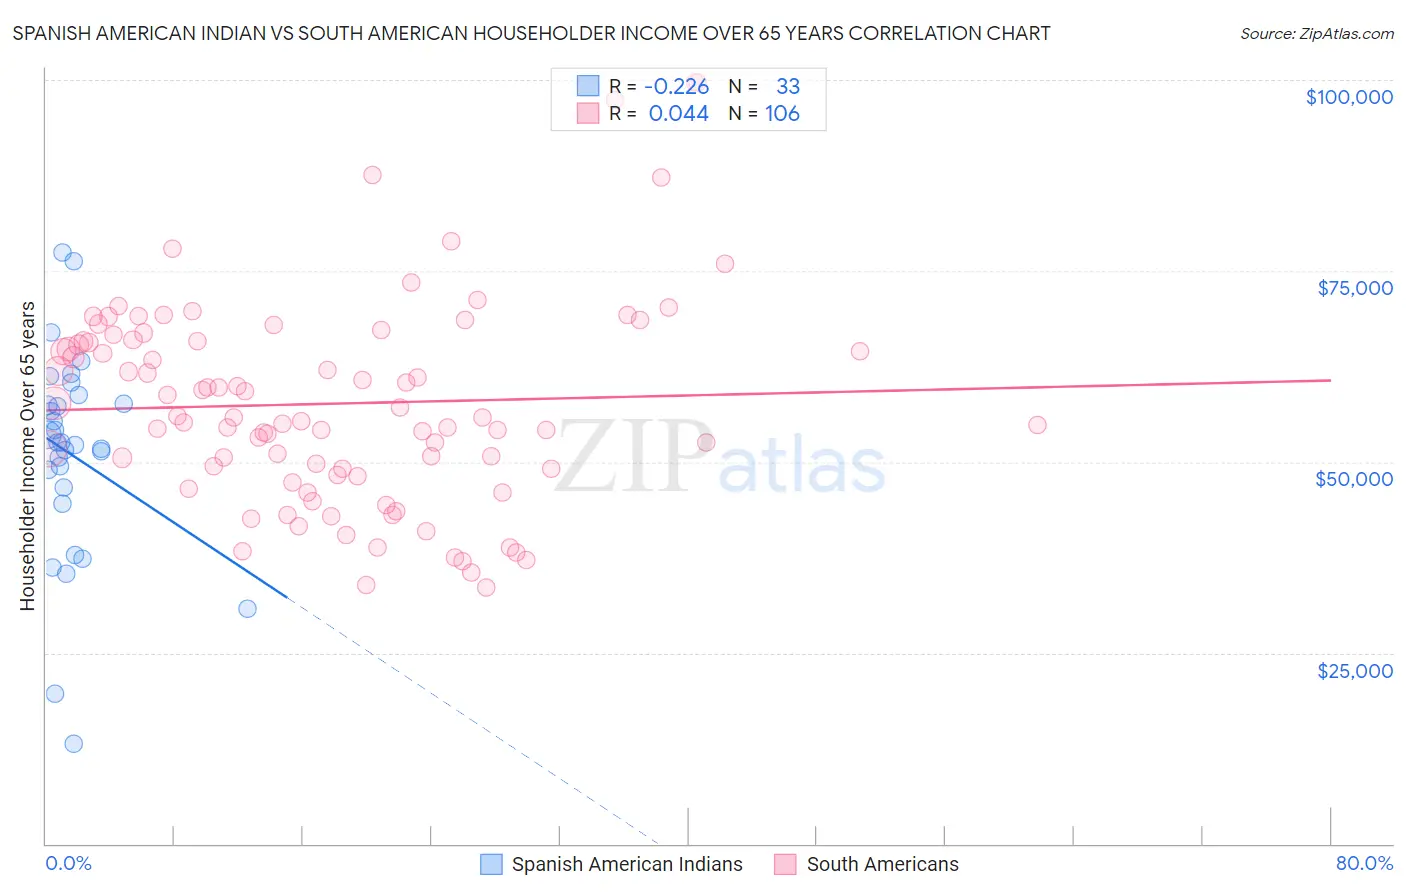 Spanish American Indian vs South American Householder Income Over 65 years